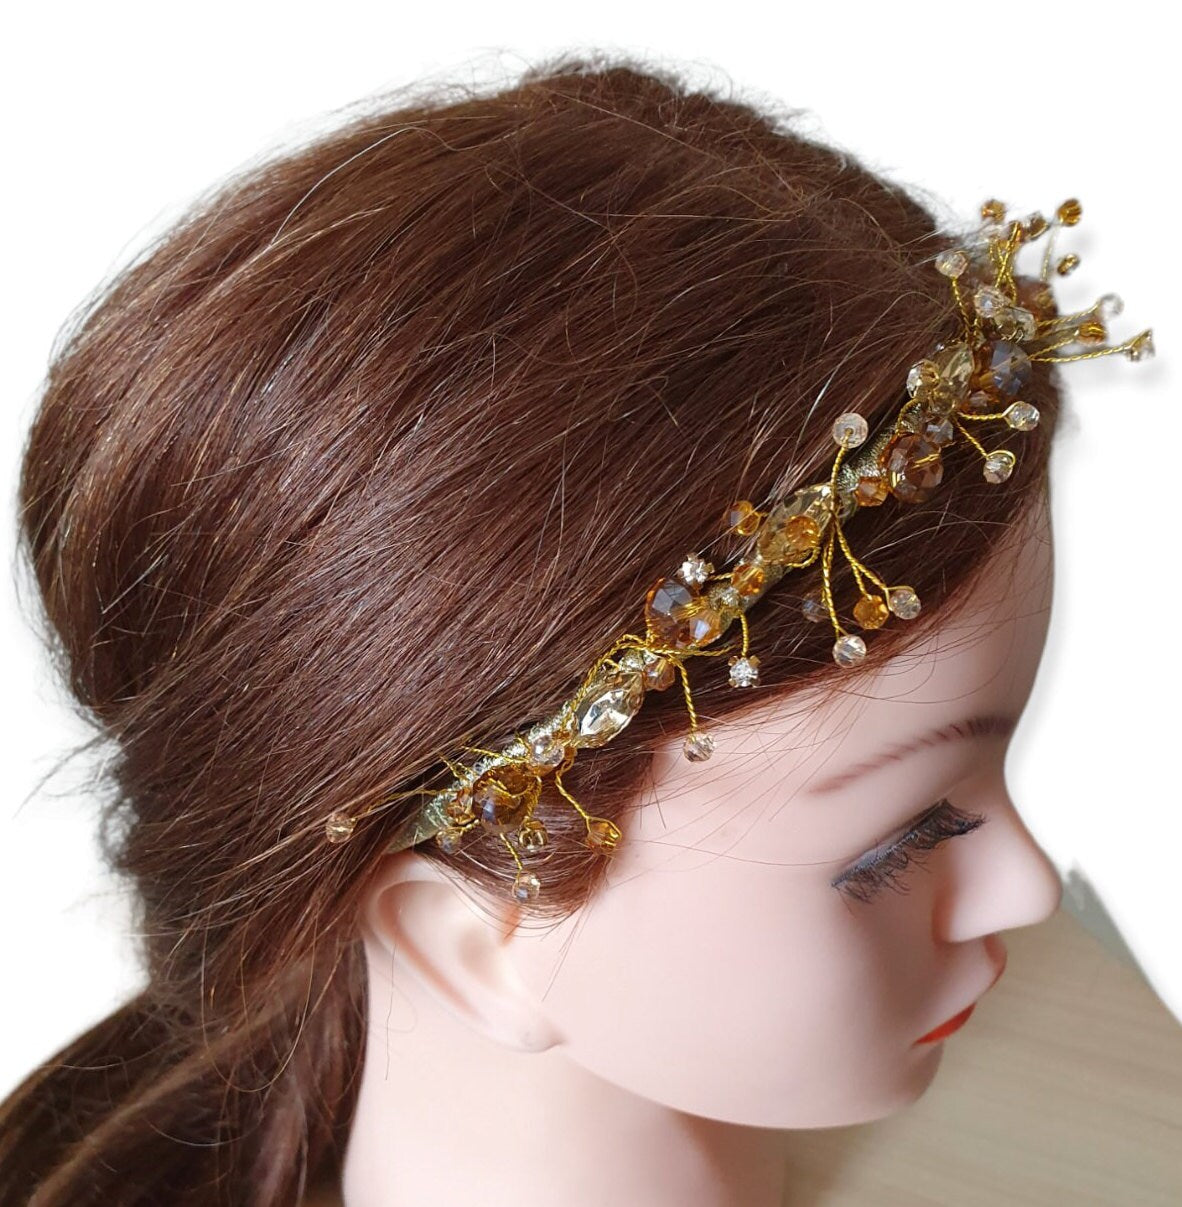 Handmade women's headband with plastic pearls, tiara, bridal diadem, hair accessories, guest tiara, special for events